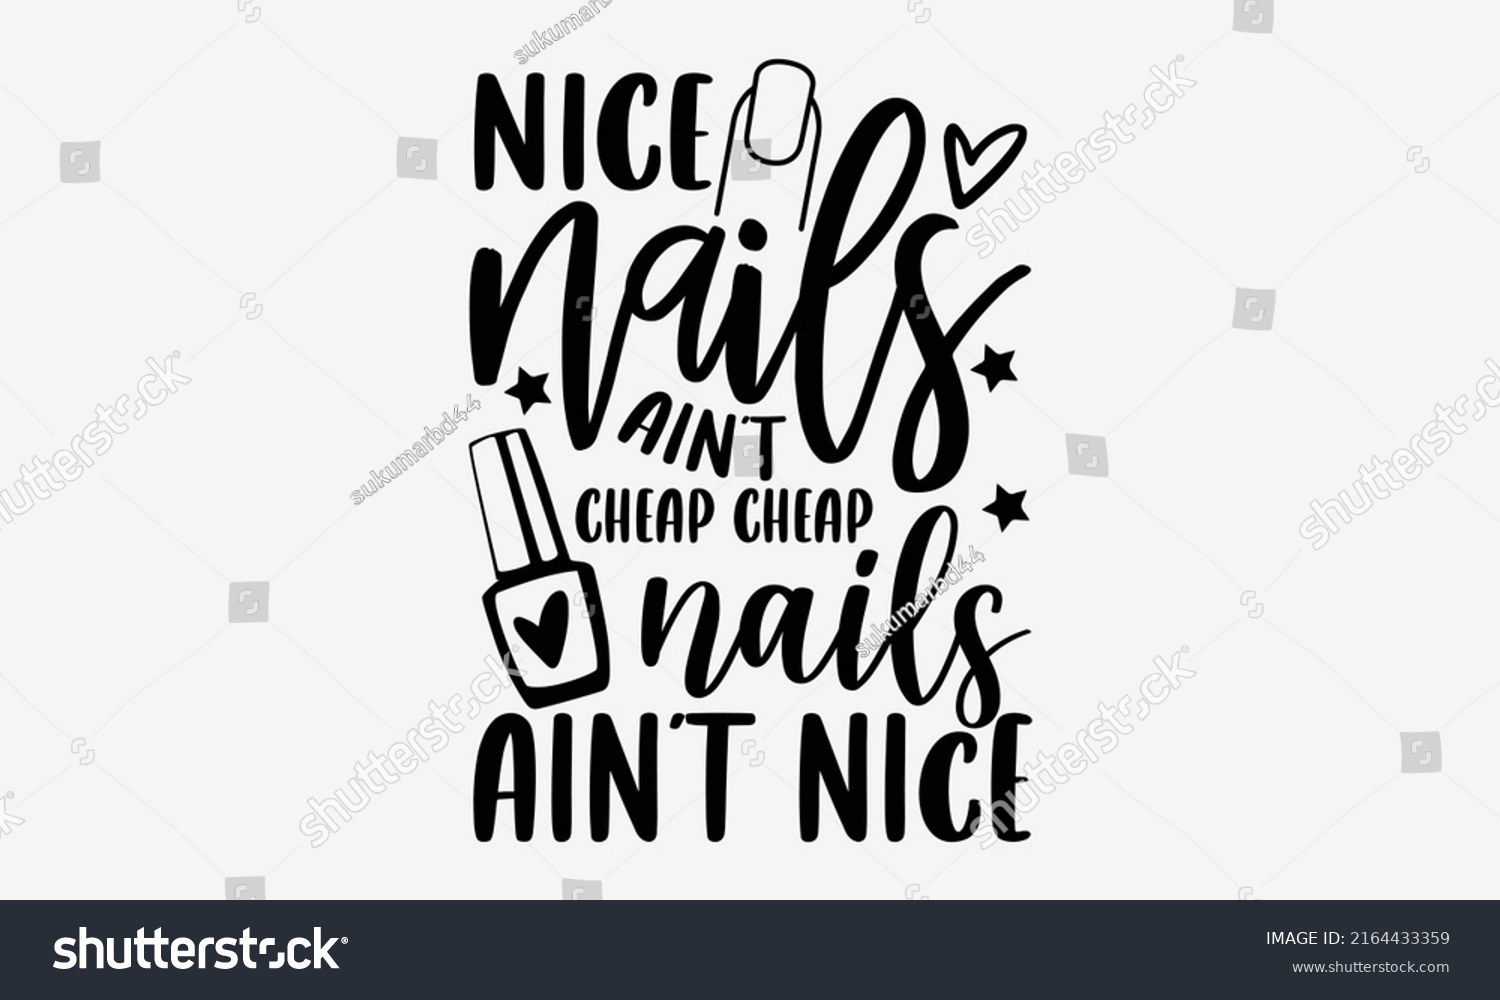 SVG of Nice nails ain't cheap cheap nails ain't nice - Nail Tech  t shirt design, Hand drawn lettering phrase, Calligraphy graphic design, SVG Files for Cutting Cricut and Silhouette svg